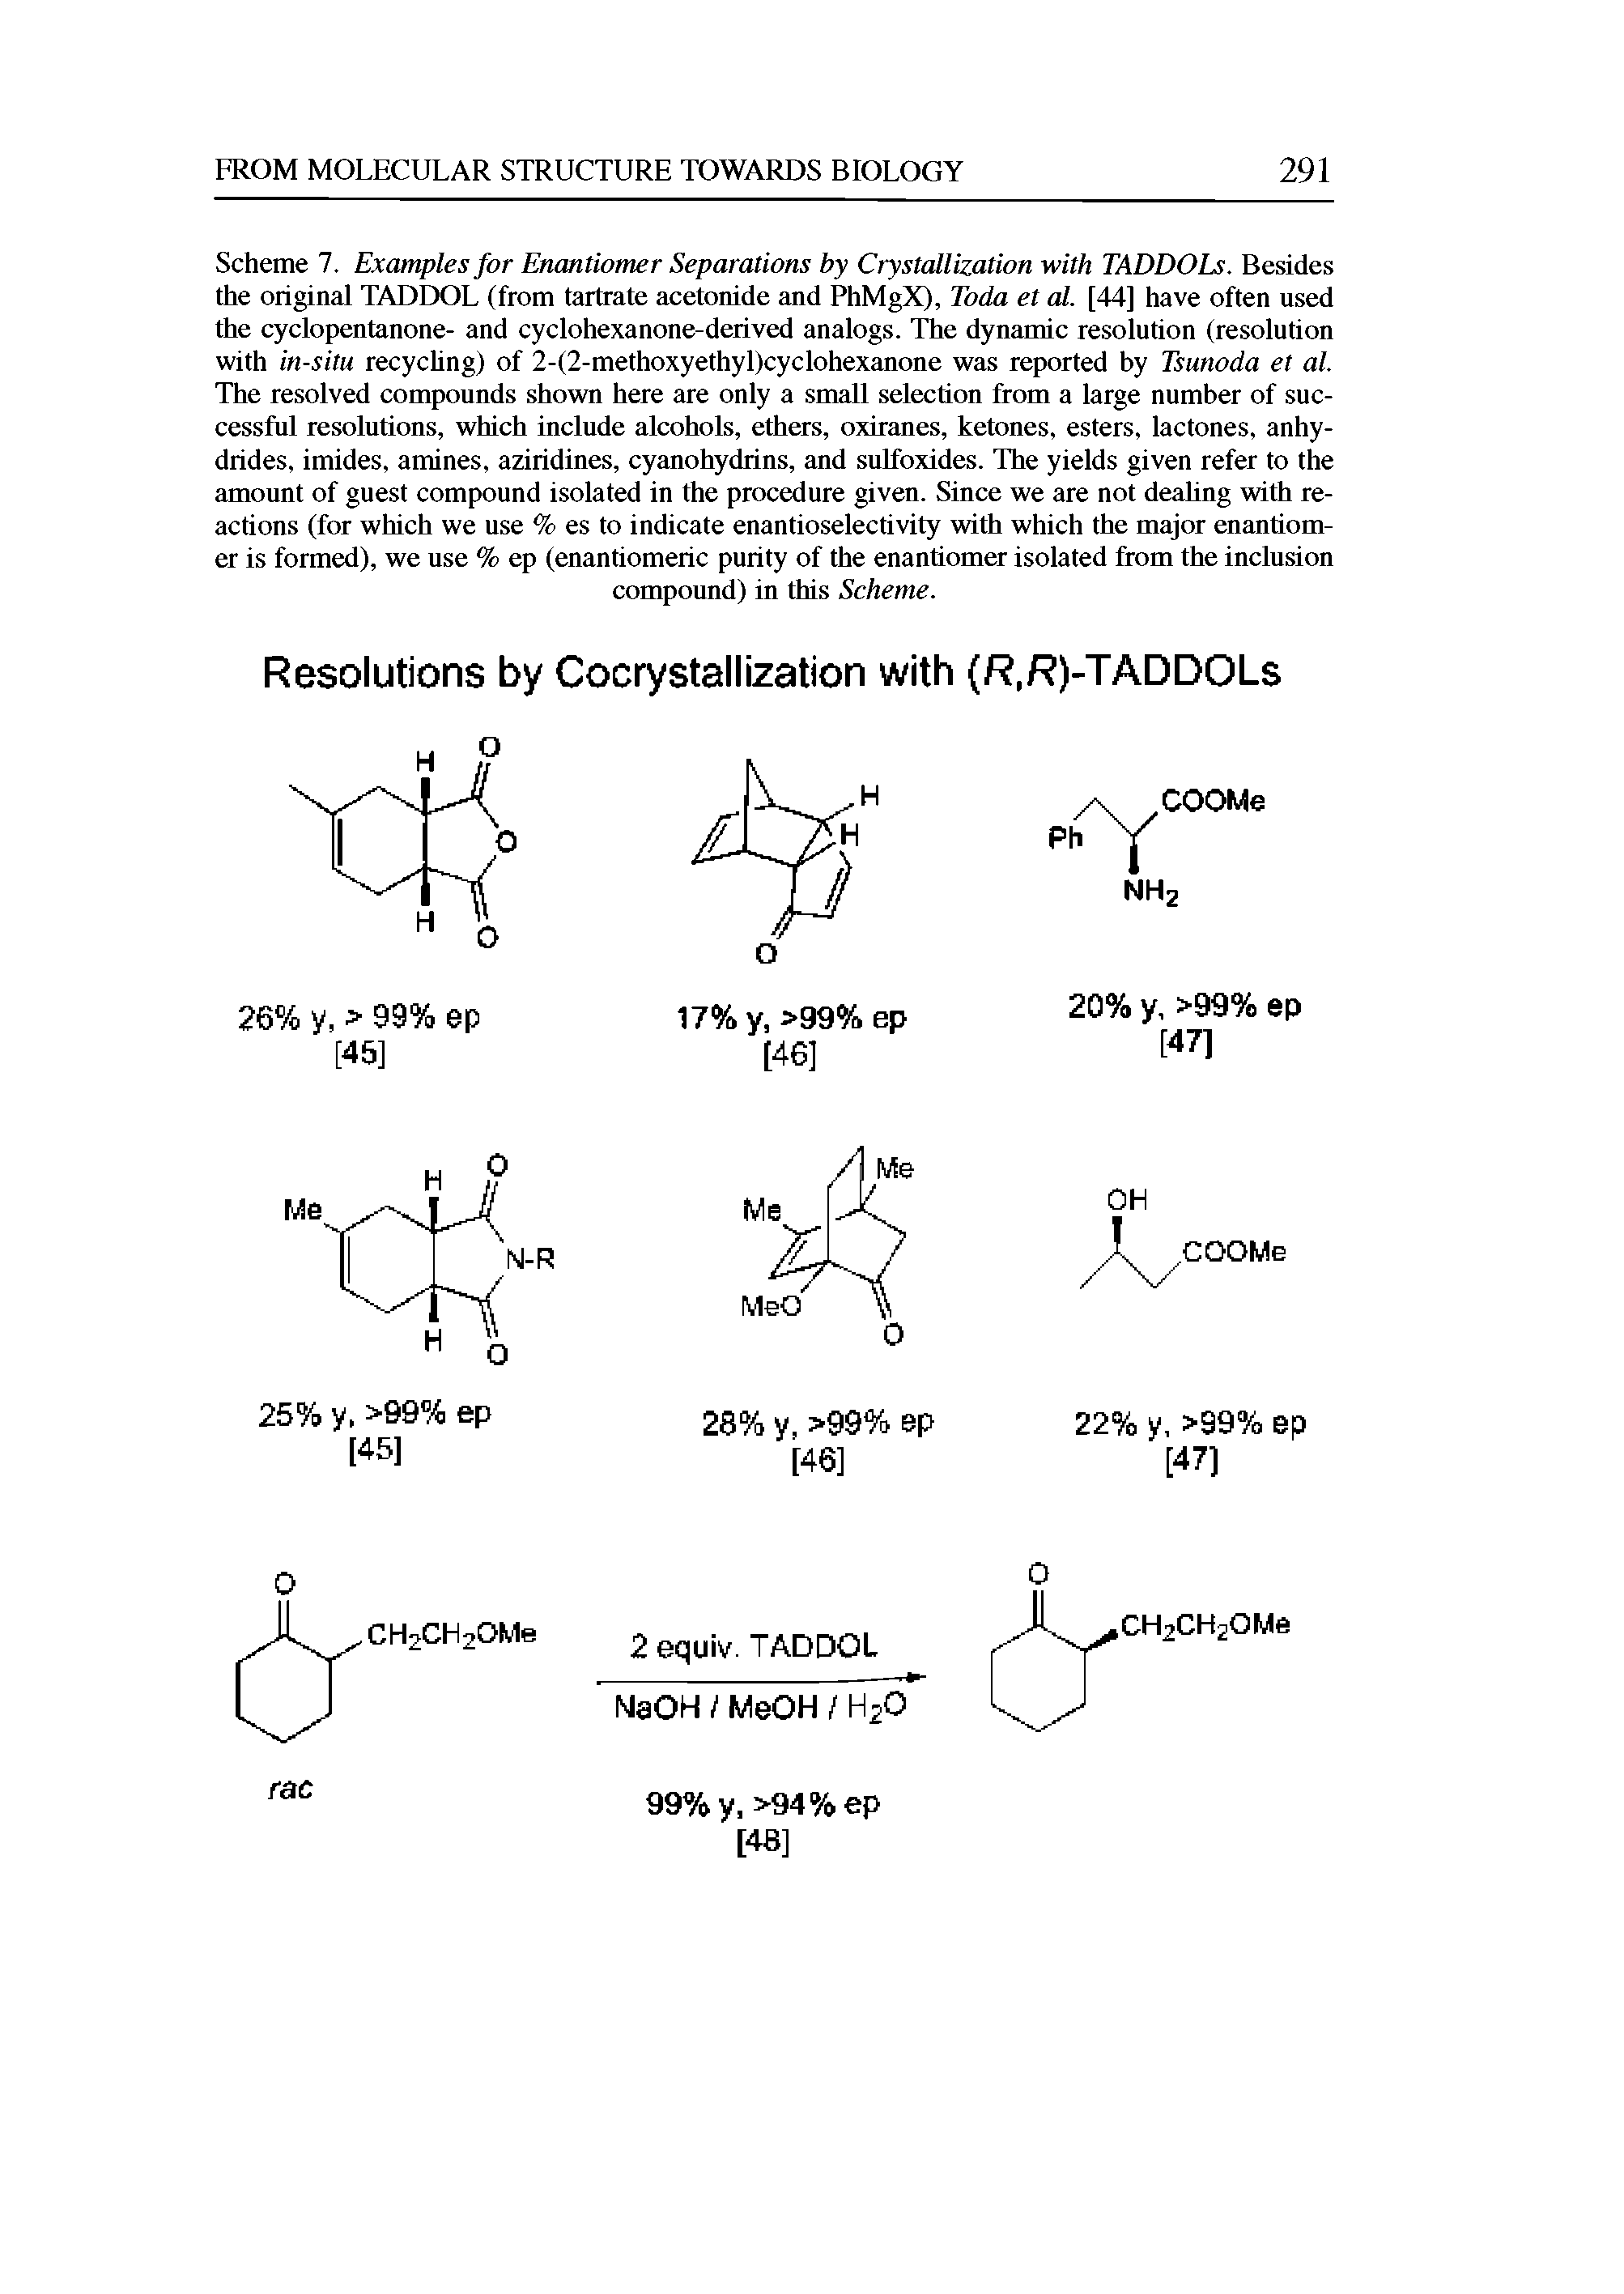 Scheme 7. Examples for Enantiomer Separations by Crystallization with TADDOLs. Besides the original TADDOL (from tartrate acetonide and PhMgX), Toda et al. [44] have often used the cyclopentanone- and cyclohexanone-derived analogs. The dynamic resolution (resolution with in-situ recychng) of 2-(2-methoxyethyl)cyclohexanone was reported by Tsunoda et al. The resolved compounds shown here are only a small selection from a large number of successful resolutions, which include alcohols, ethers, oxiranes, ketones, esters, lactones, anhydrides, imides, amines, aziridines, cyanohydrins, and sulfoxides. The yields given refer to the amount of guest compound isolated in the procedure given. Since we are not dealing with reactions (for which we use % es to indicate enantioselectivity with which the major enantiomer is formed), we use % ep (enantiomeric purity of the enantiomer isolated from the inclusion...